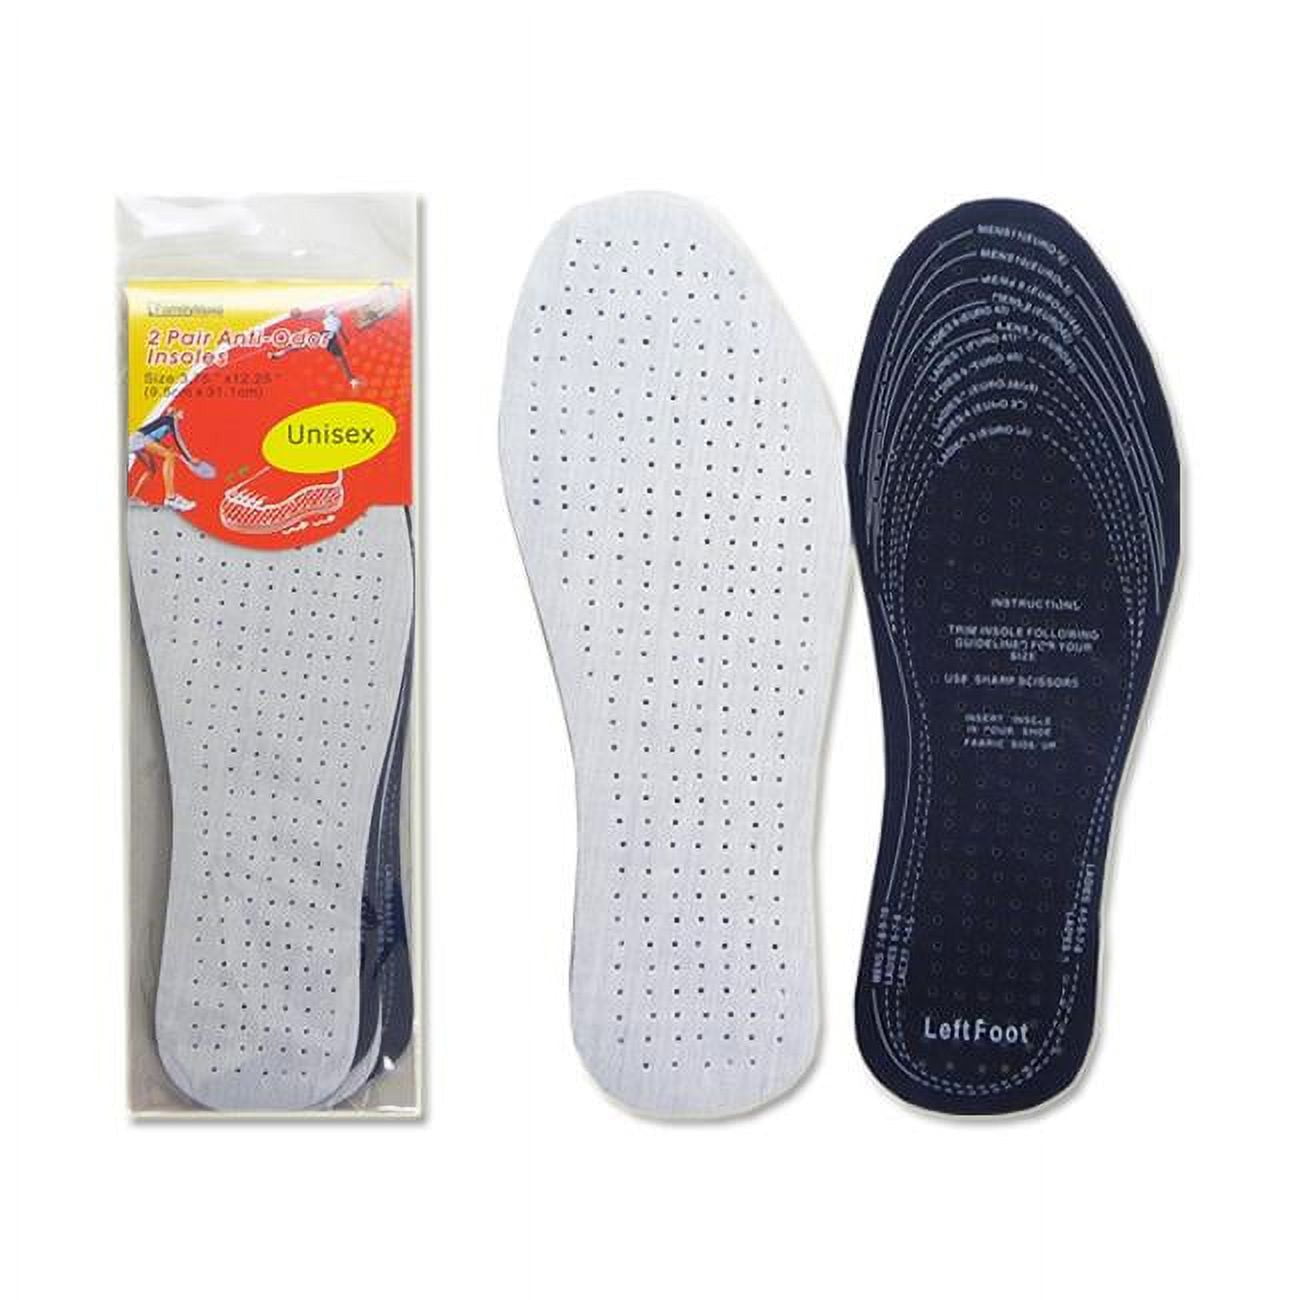 Picture of FamilyMaid 10897A Anti-Odor Pad Insoles - 2 Pair